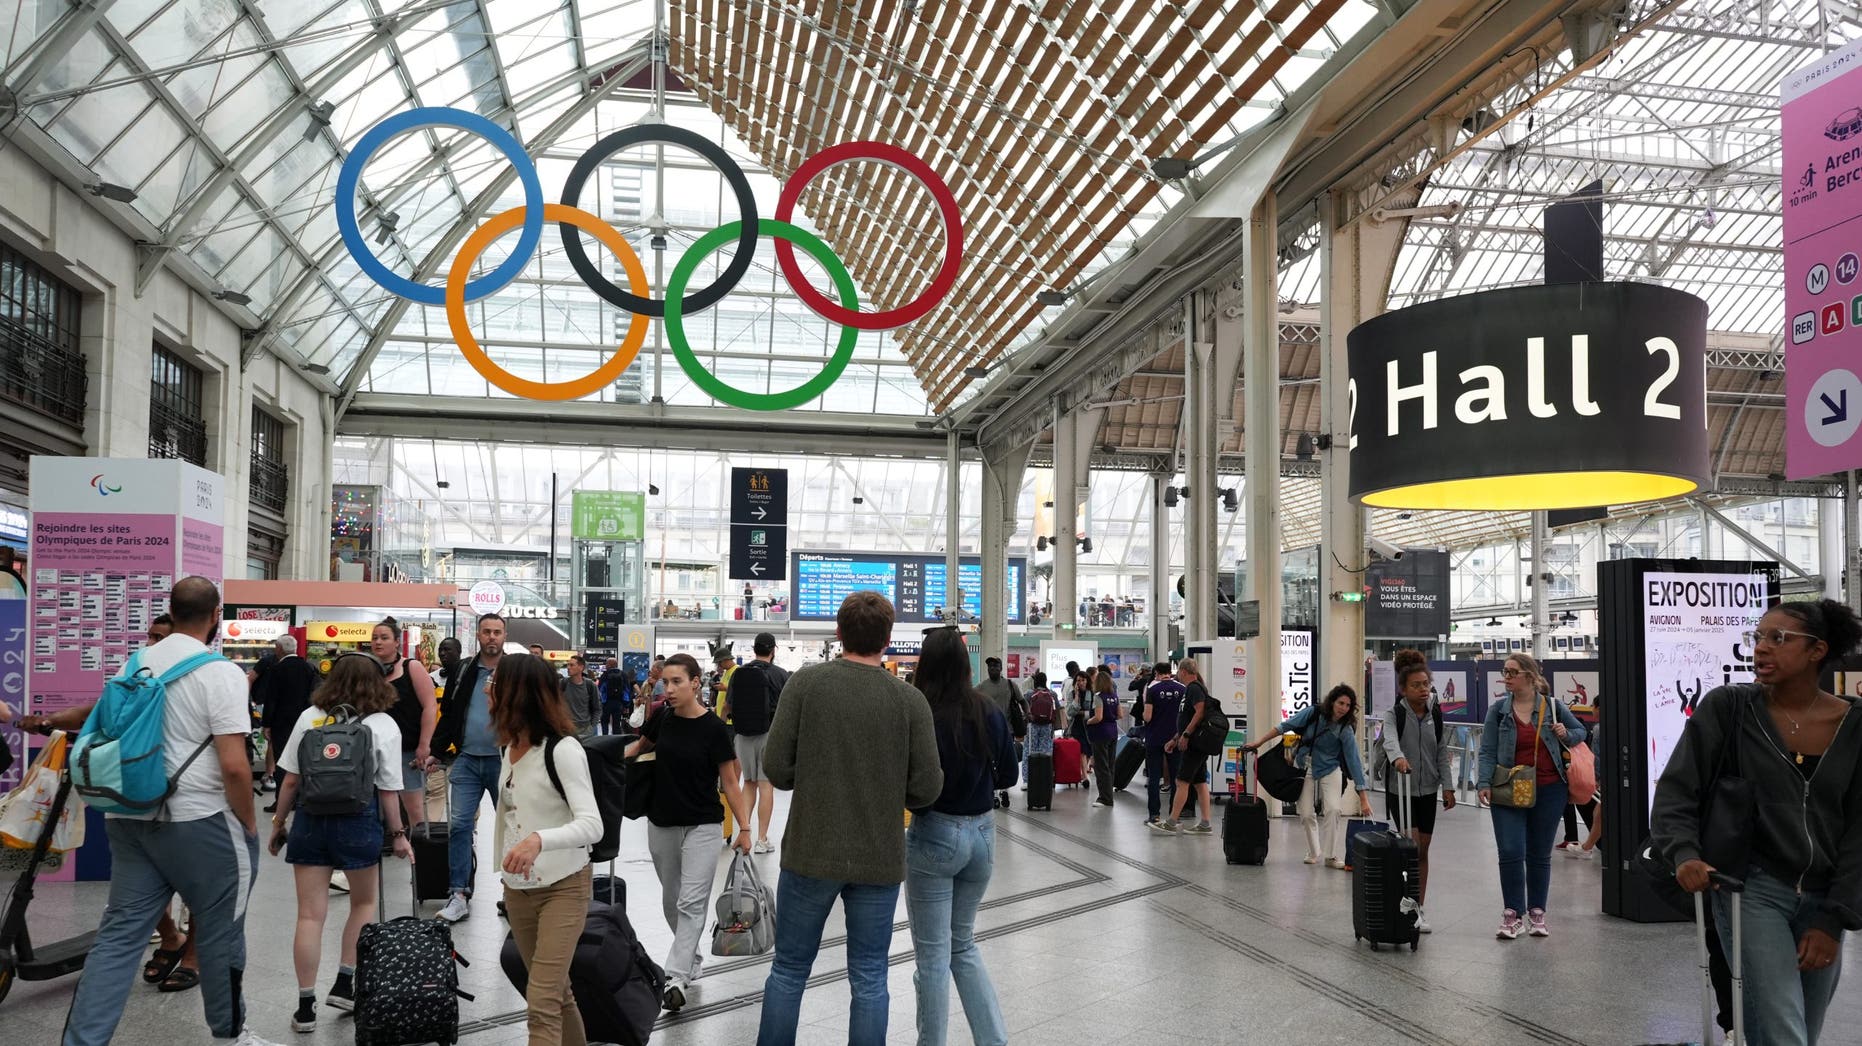 Paris rail system disrupted just hours before Olympics opening ceremony Friday